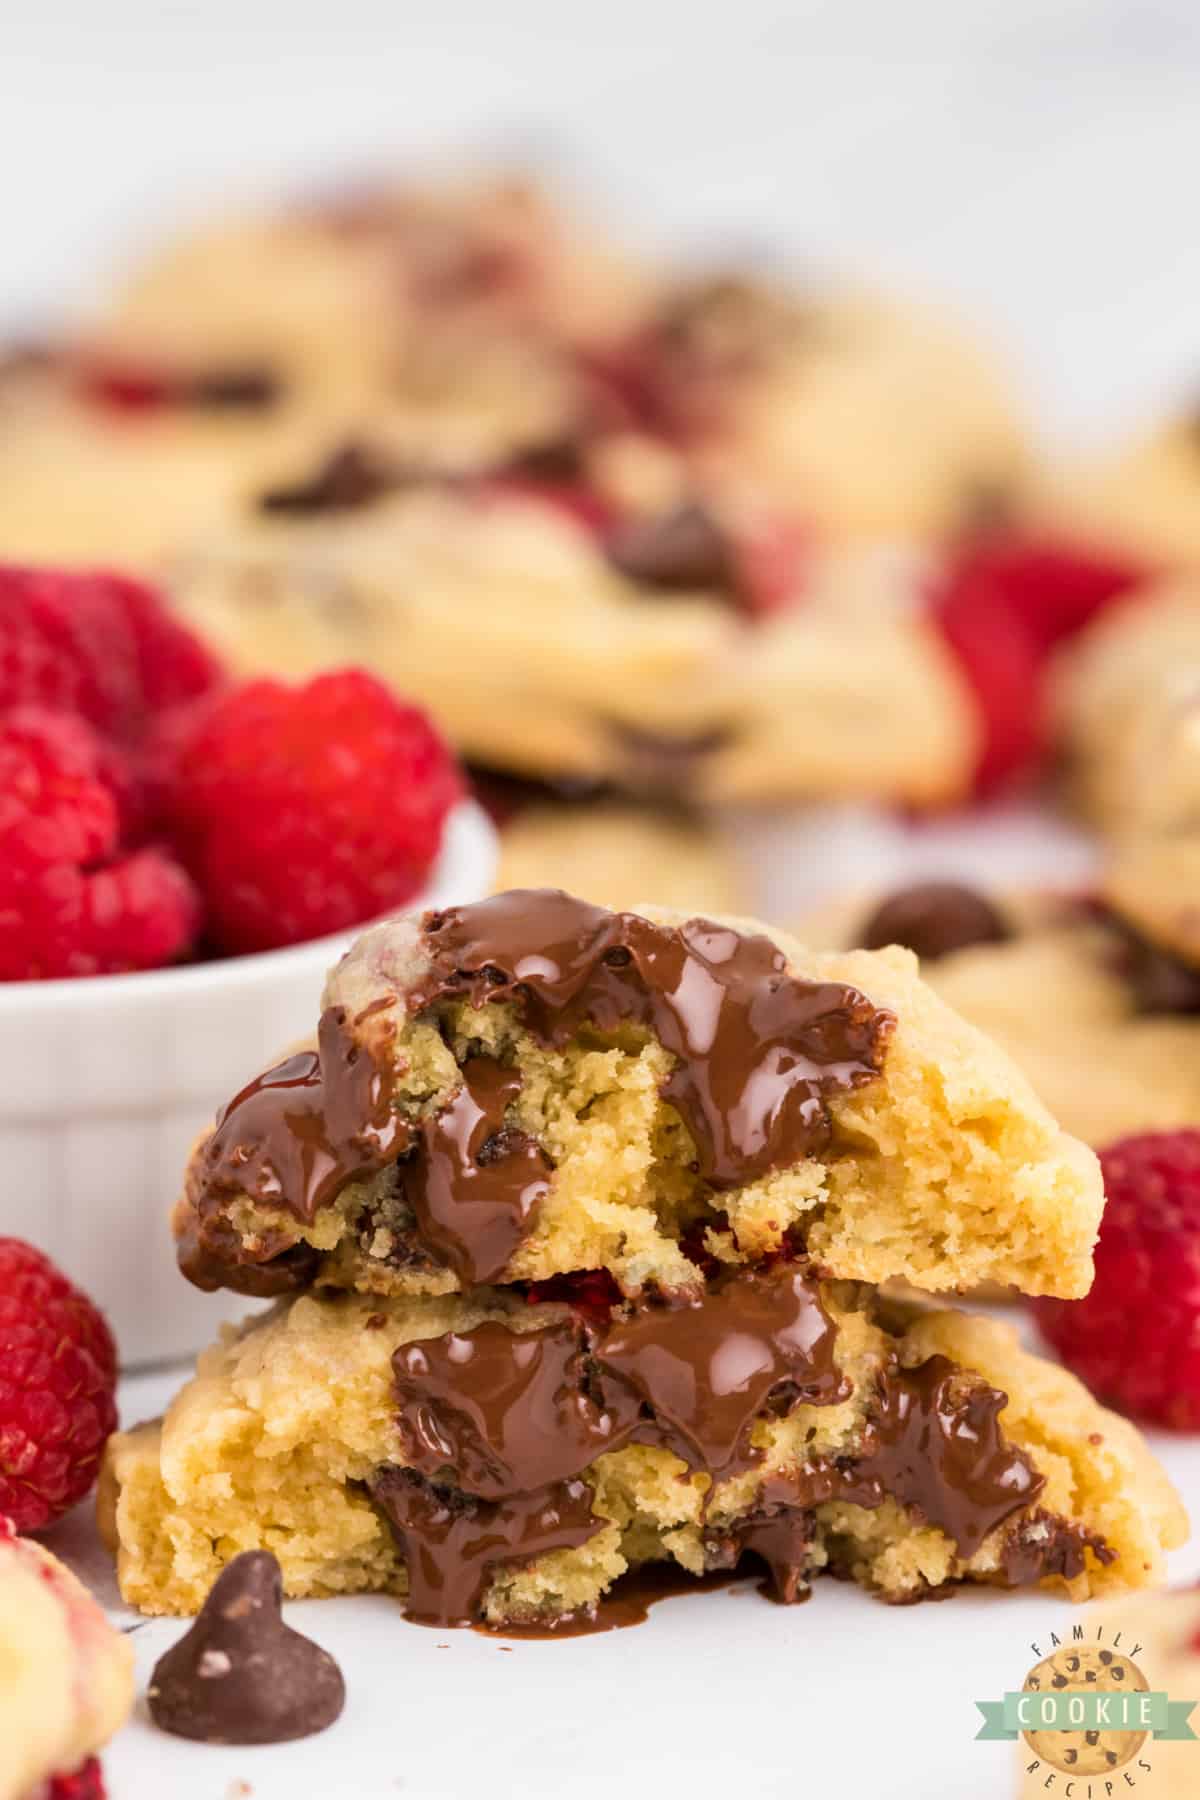 Pudding cookies with chocolate chips and raspberries